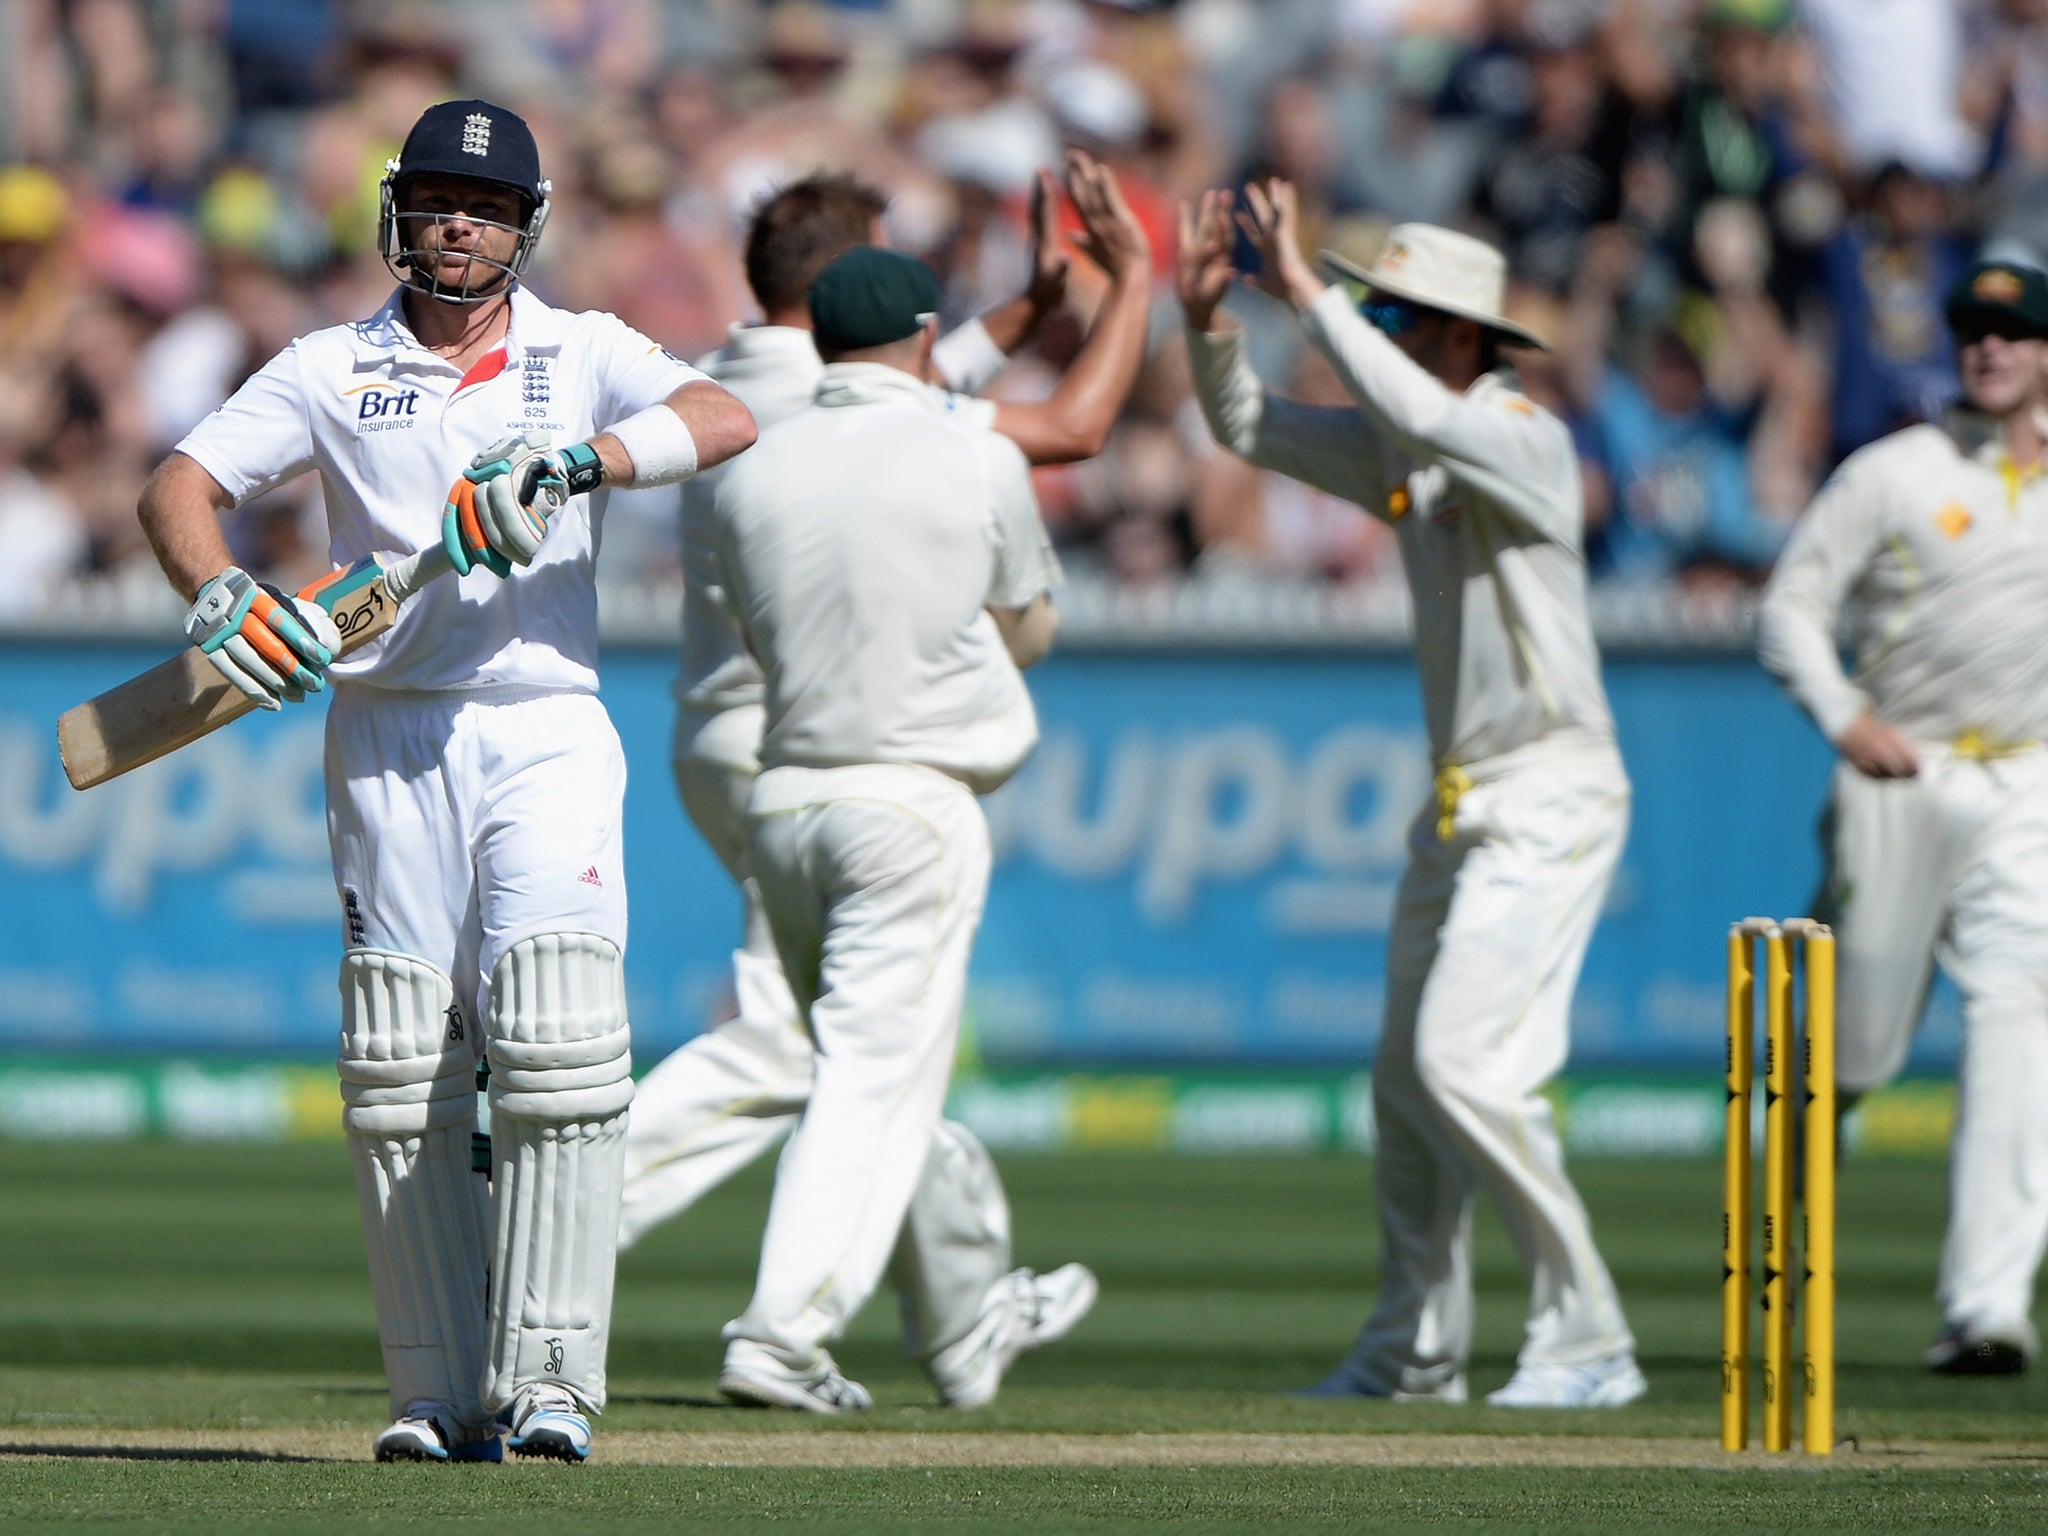 Ian Bell walks off at the MCG after the England batsman is dismissed in the Fourth Ashes Test